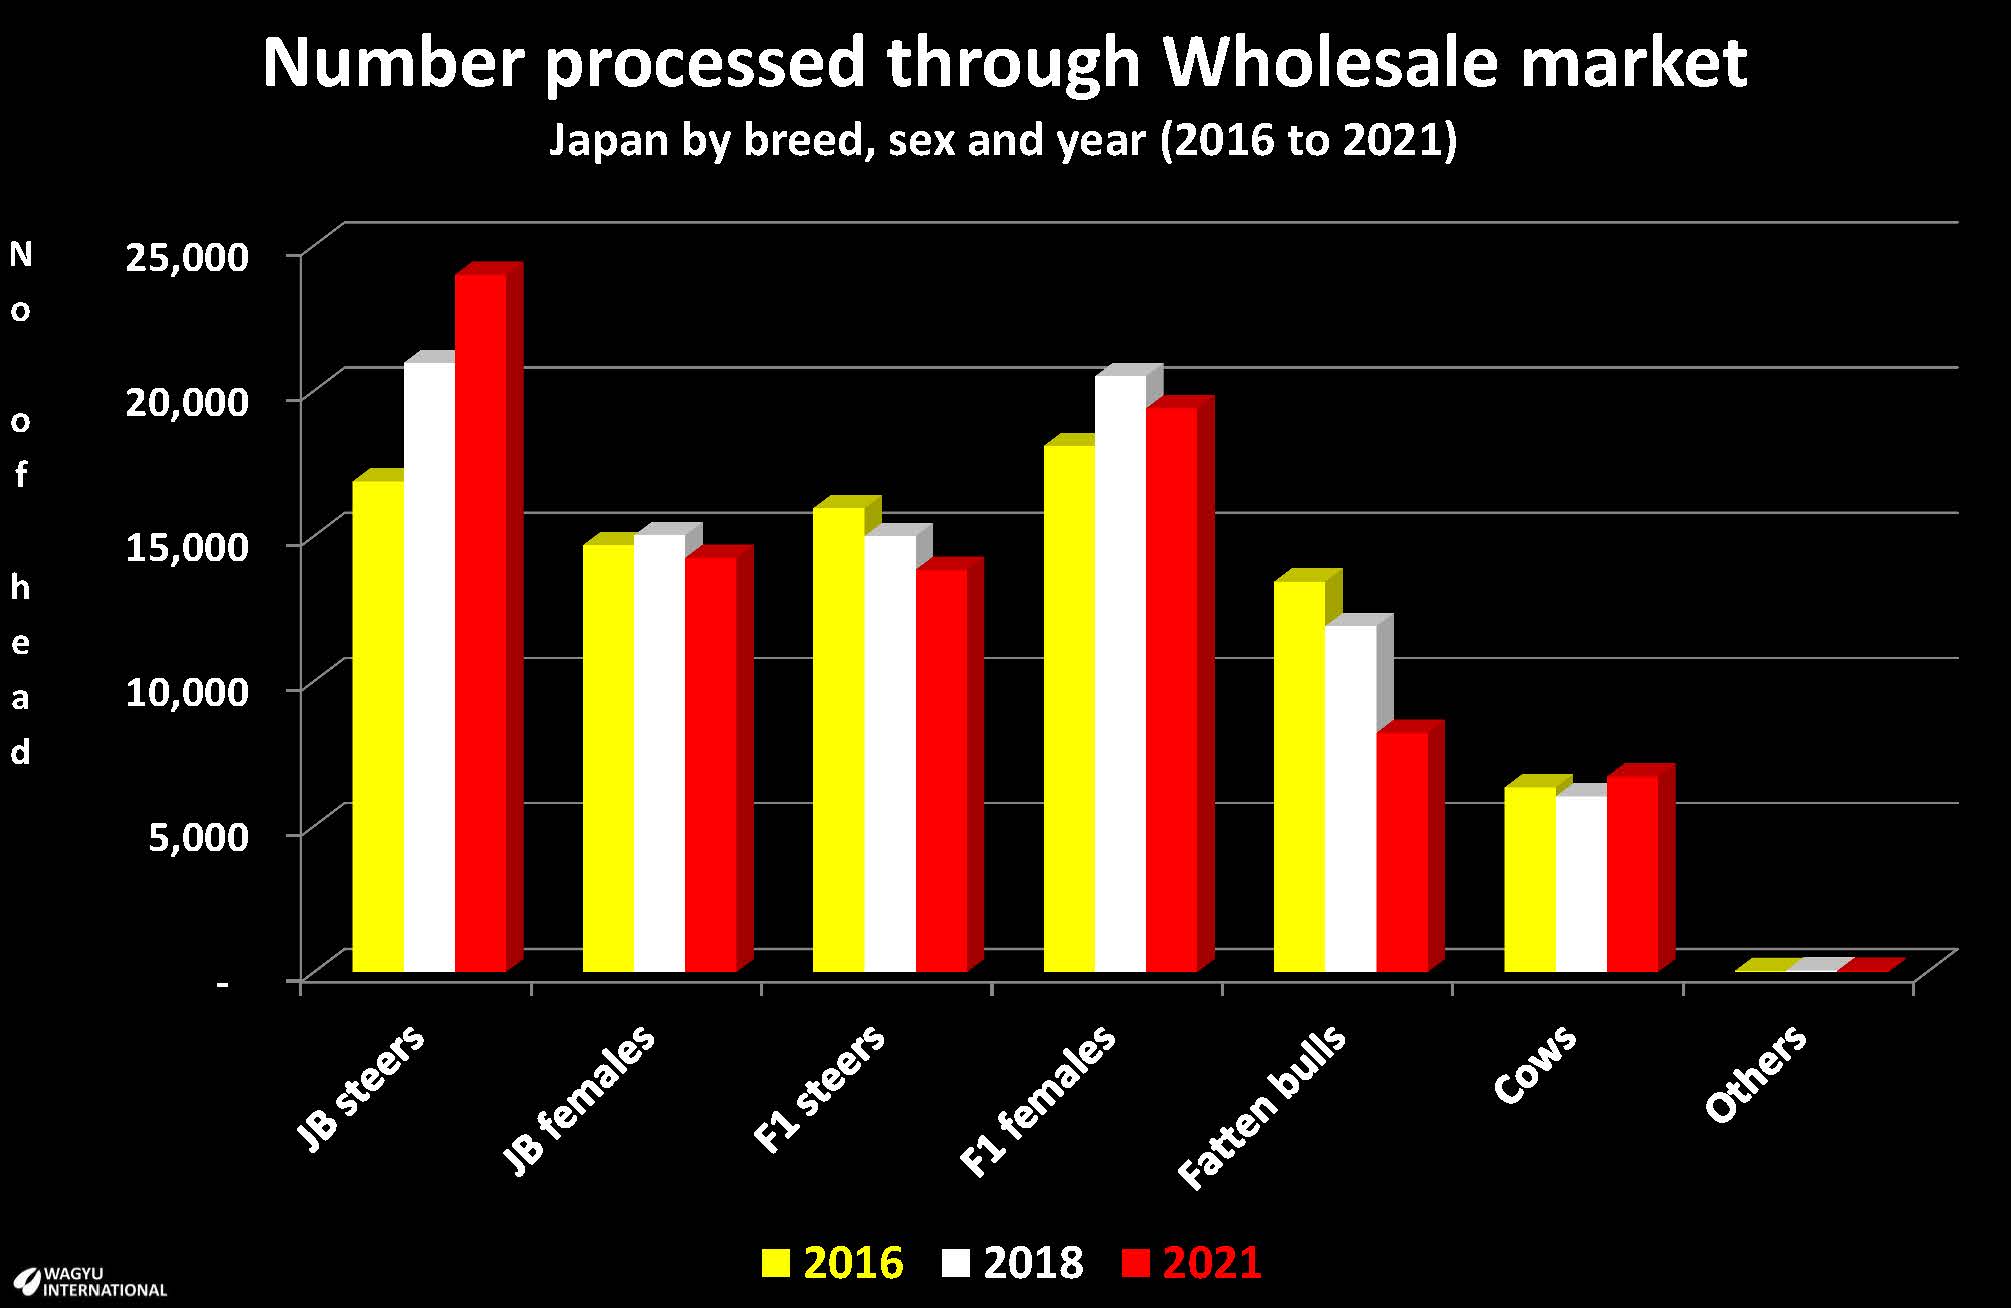 Number of beef cattle processed through Wholesale markets in japan each year 2016, 2018 and 2021